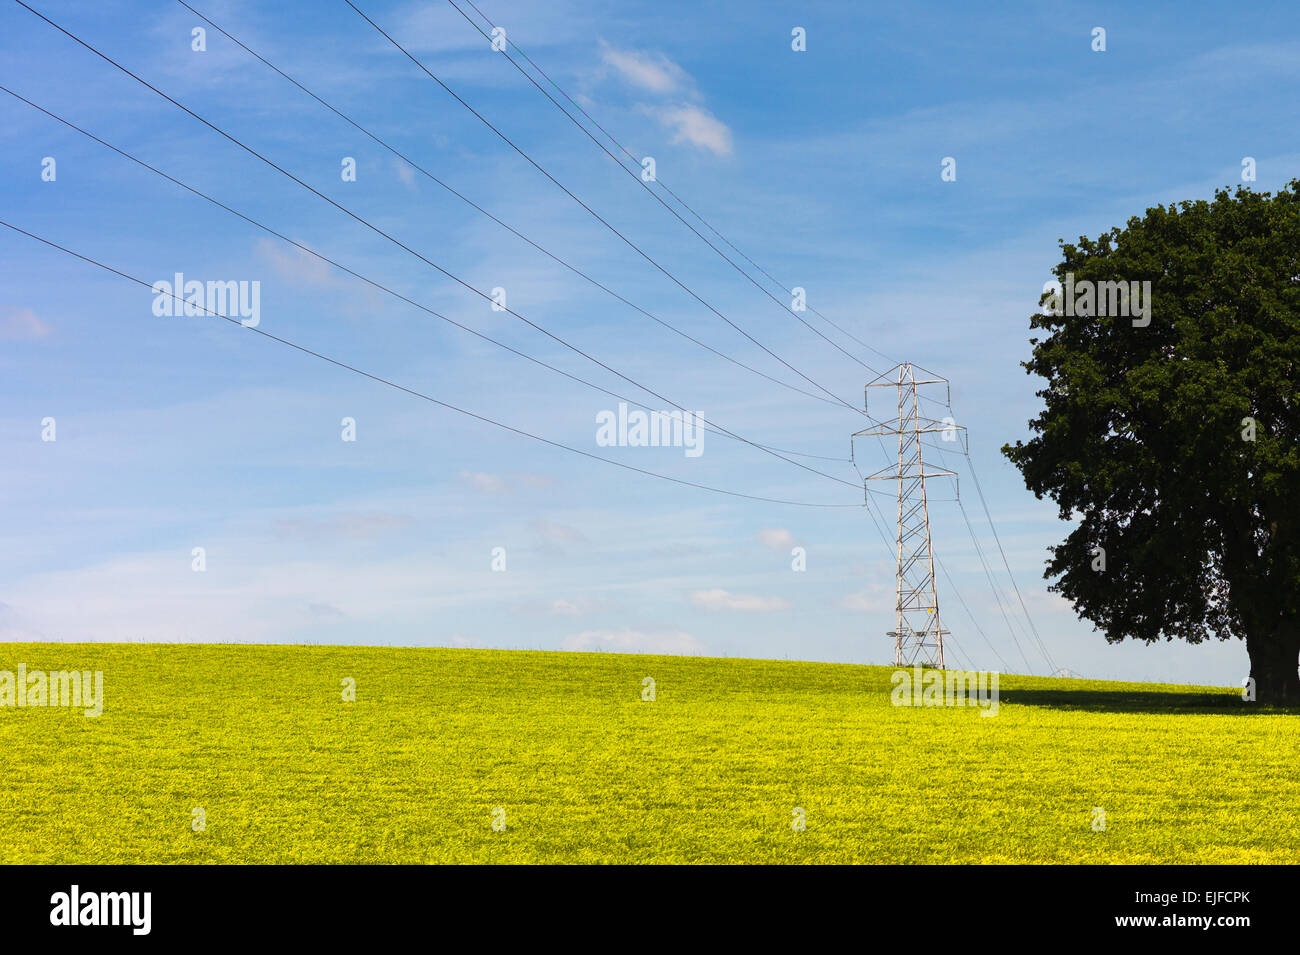 Electricity pylon and power cables in South Devon, England, UK Stock Photo